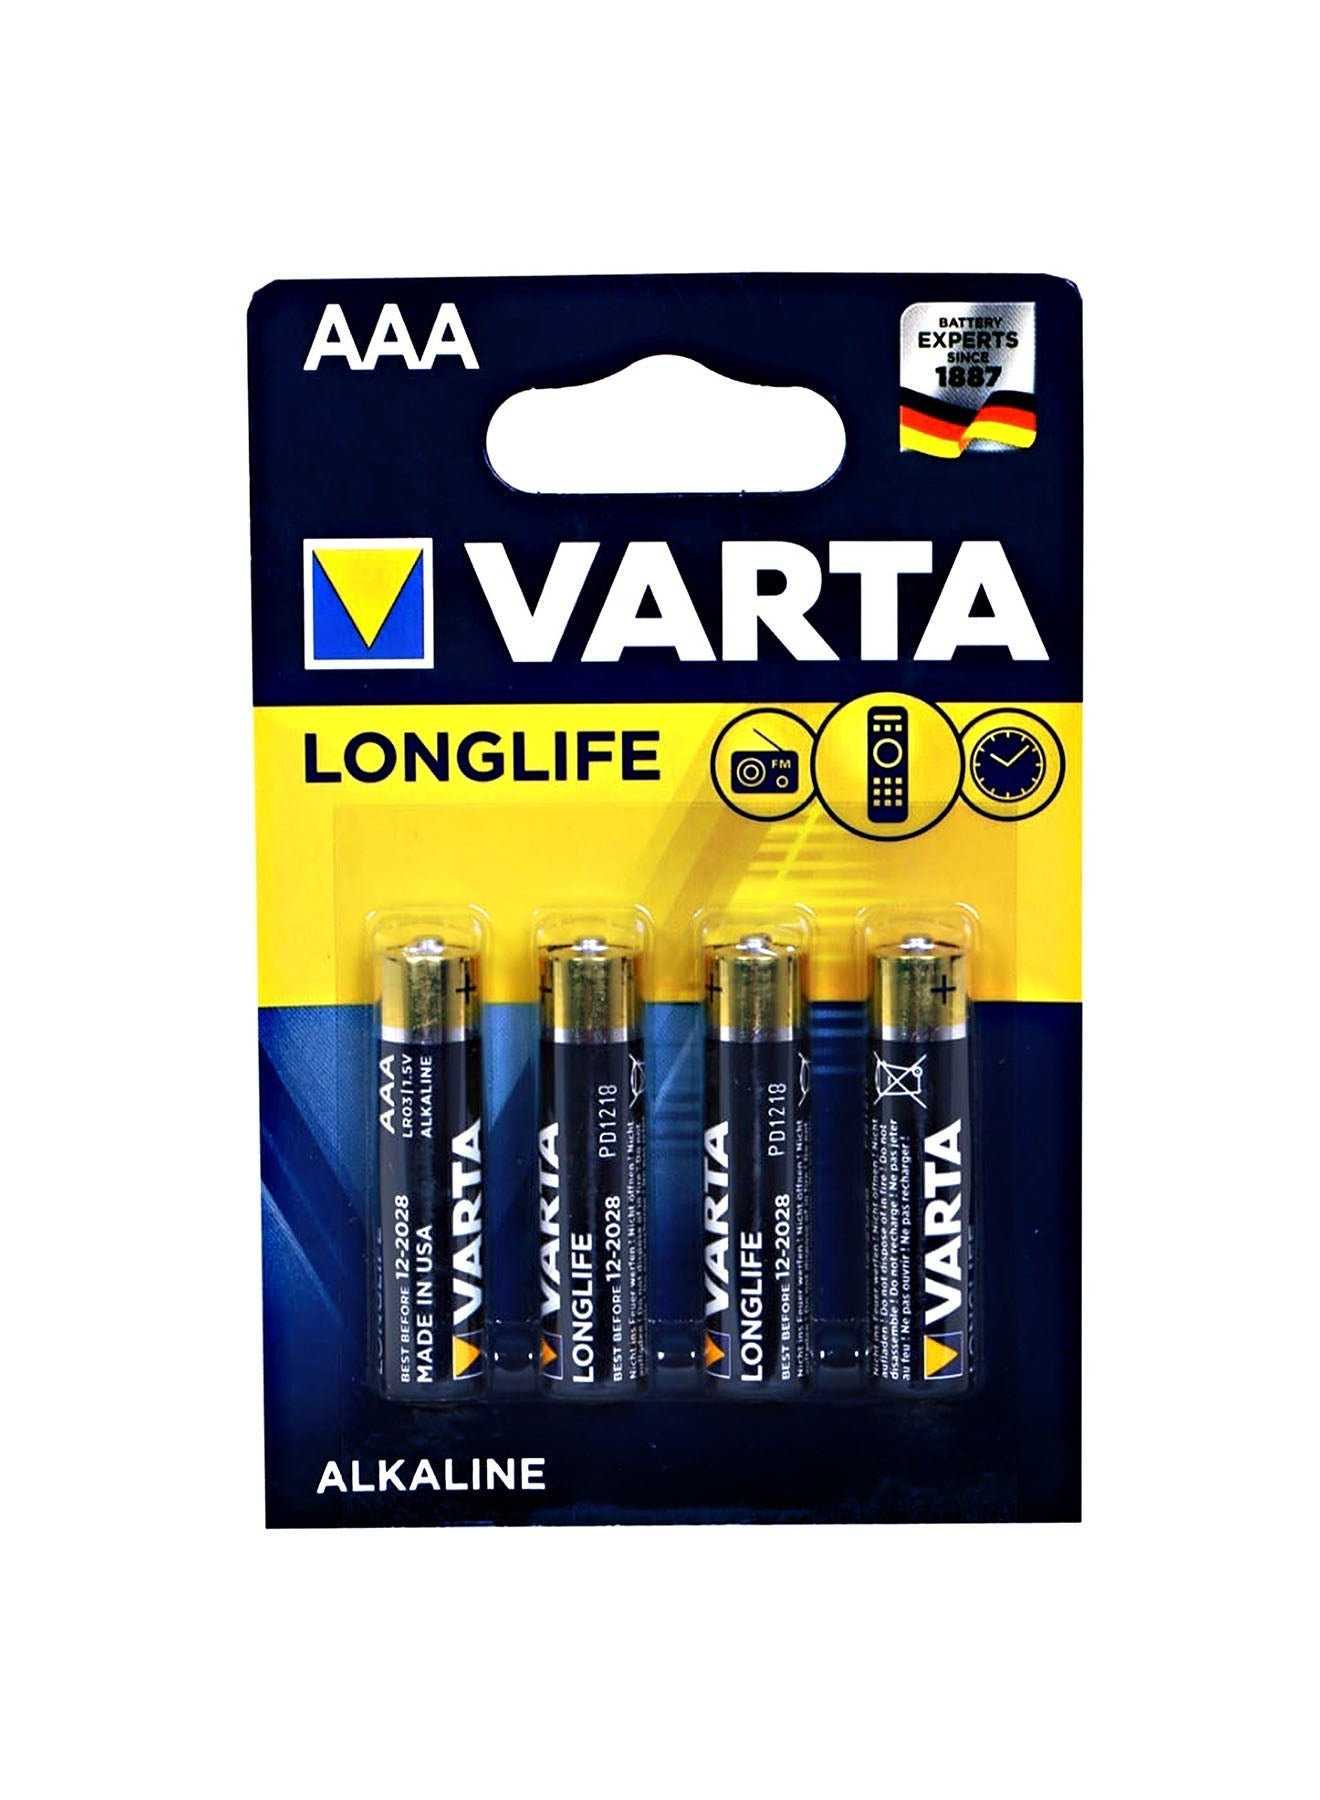 Battery VARTA Micro AAA 4pcs Longlife Alkaline, Tools & electric items, Low-price Items